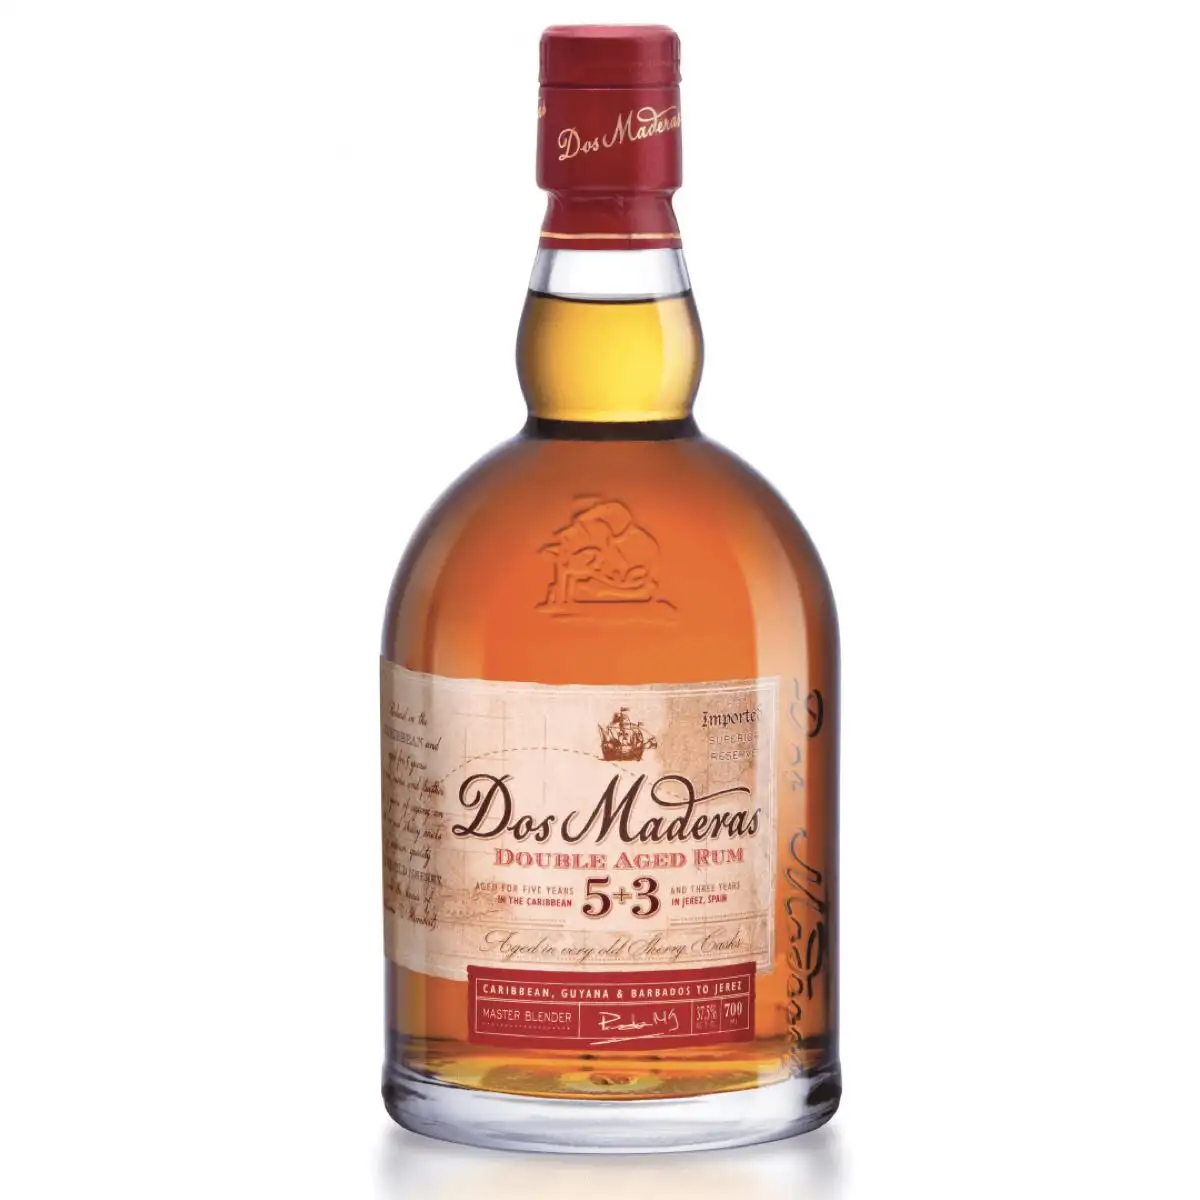 Image of the front of the bottle of the rum Dos Maderas 5 Years + 3 Years